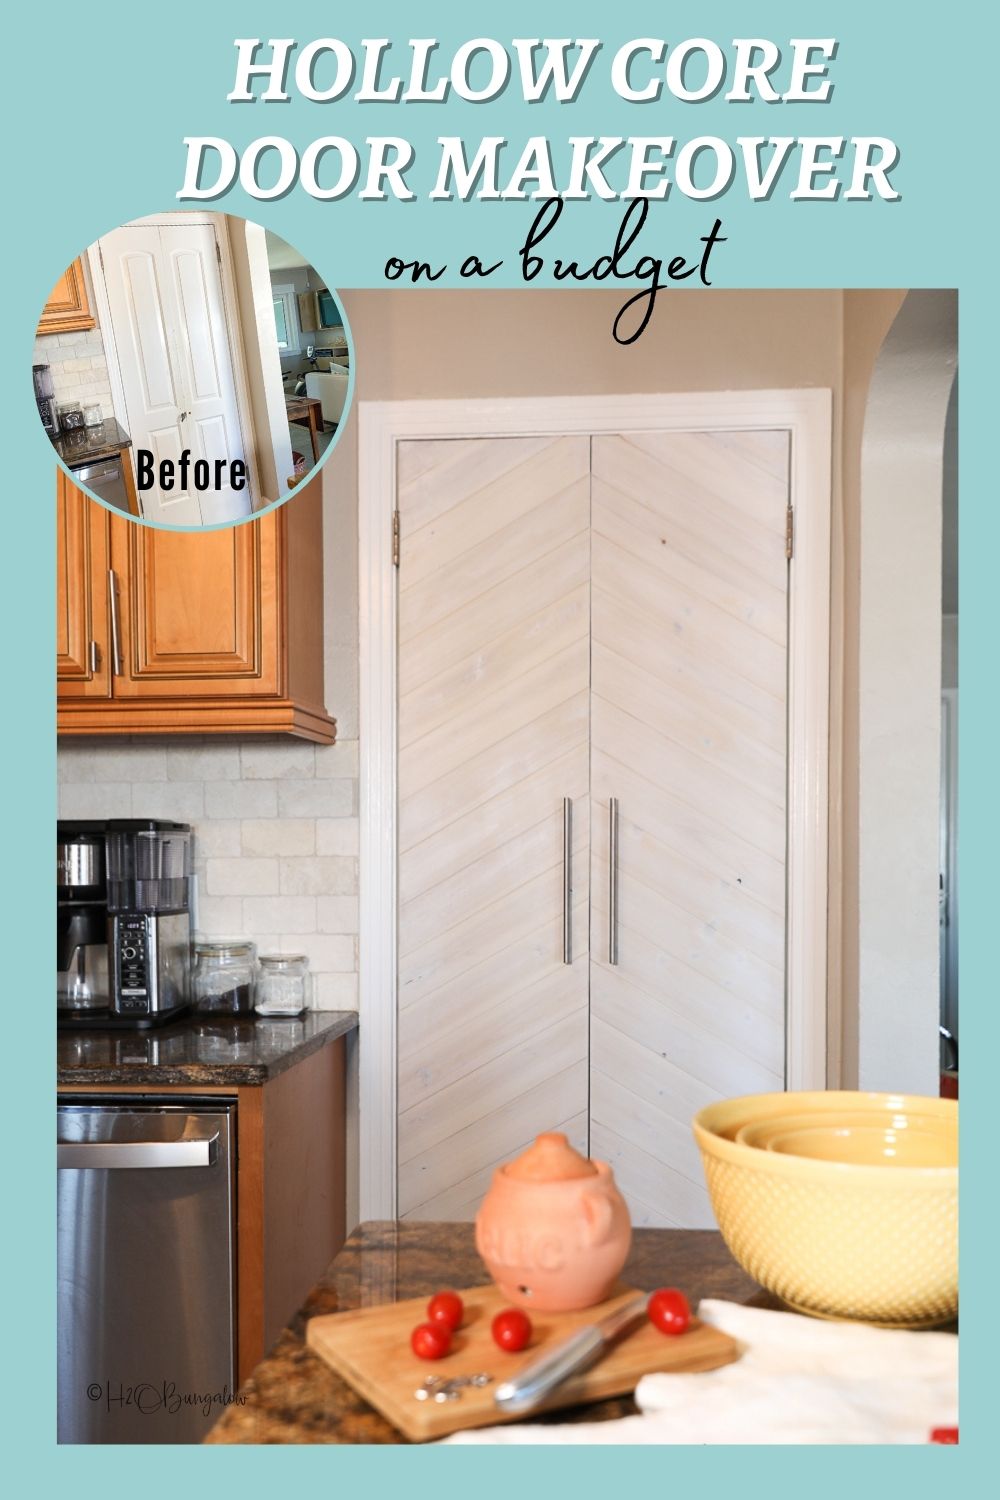 Before and after of pantry hollow core door makeover with text